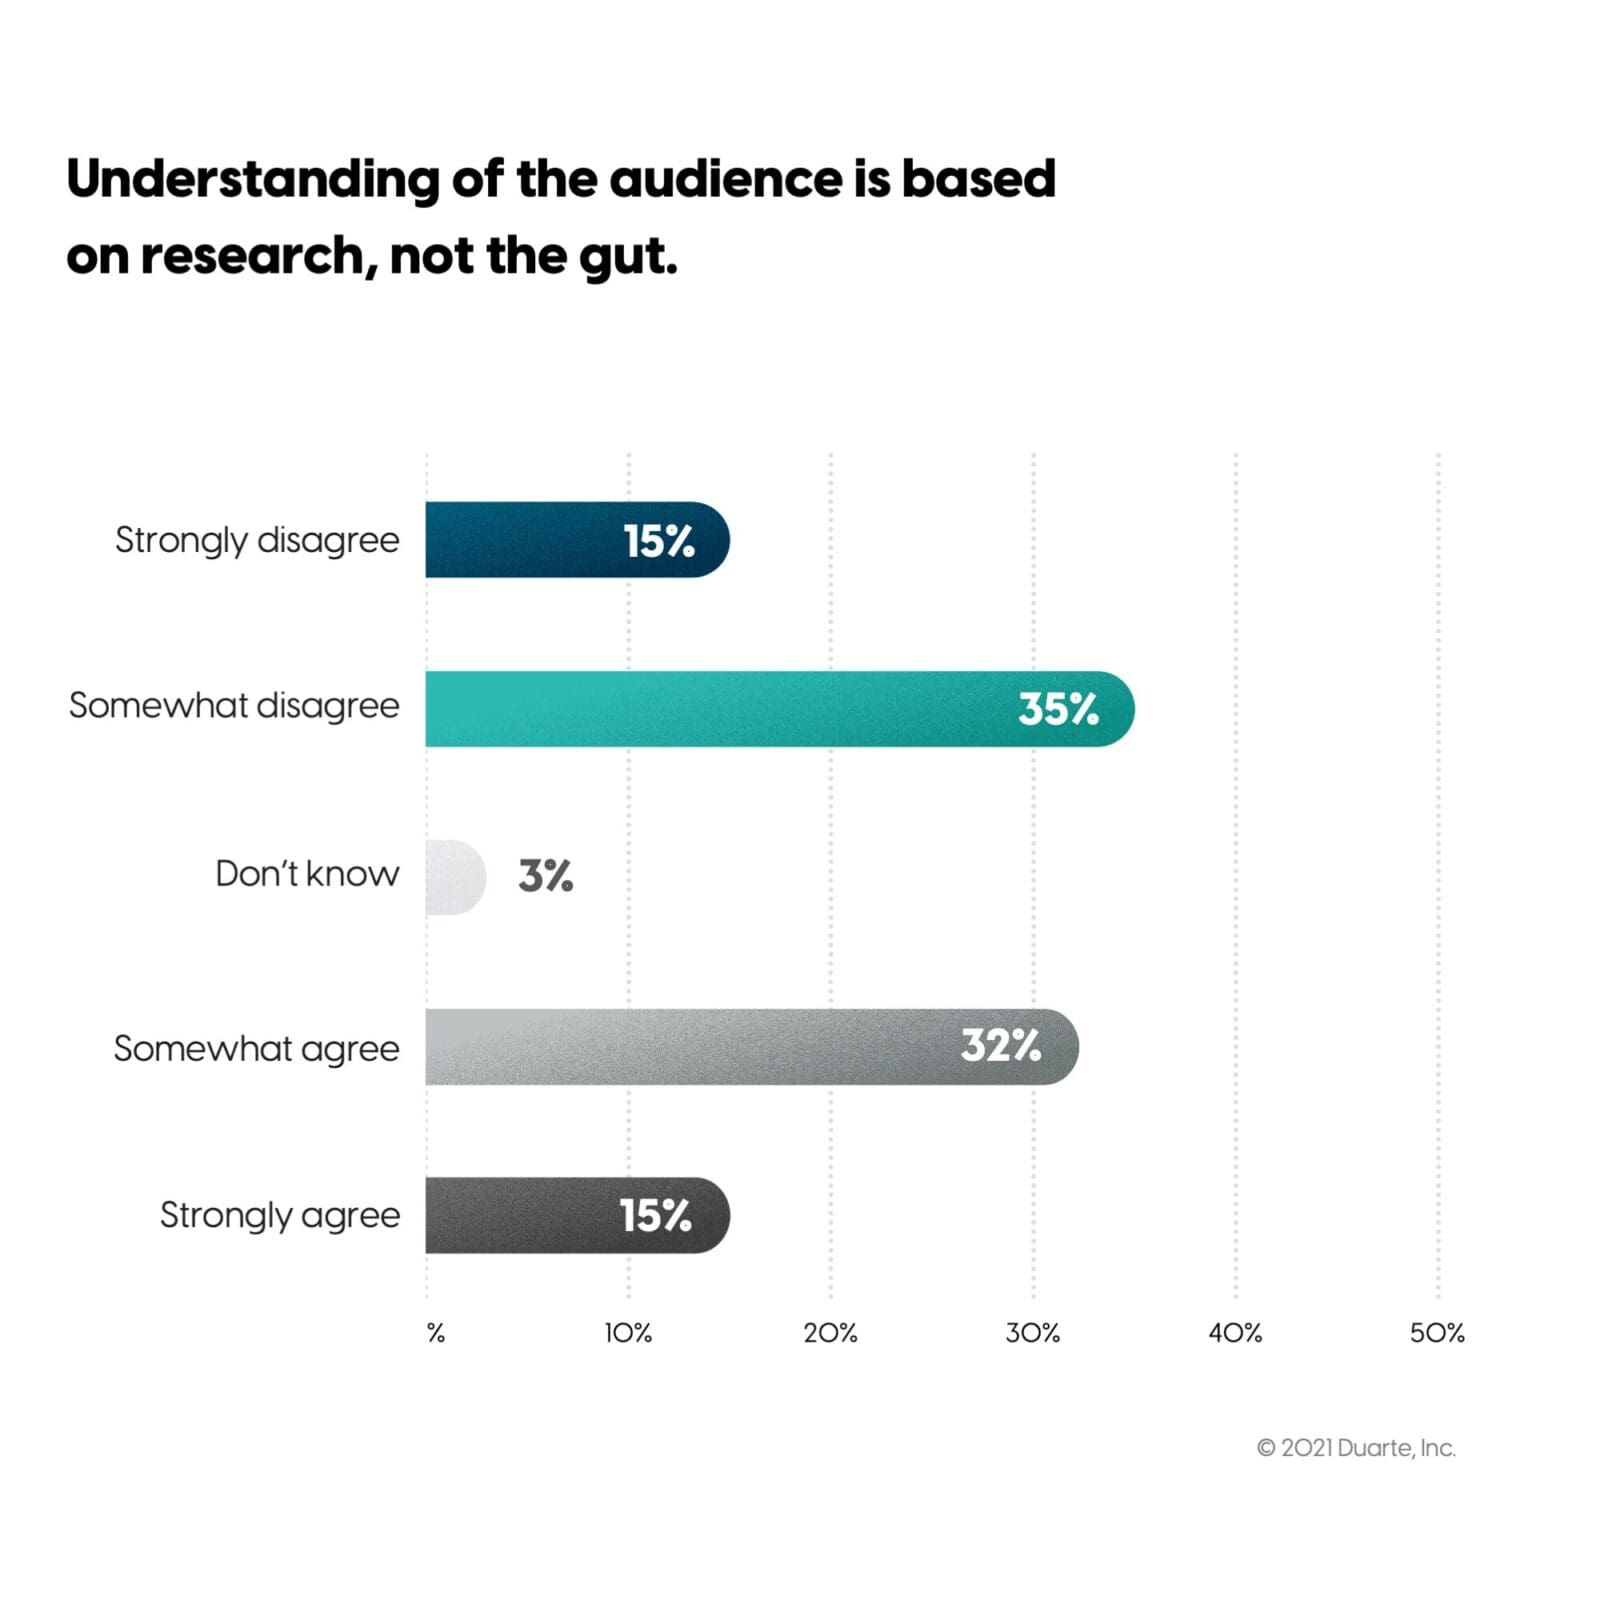 Survey results for question: Understanding of the audience is based on research, not the gut. Majority (35%) said they "Somewhat disagree."